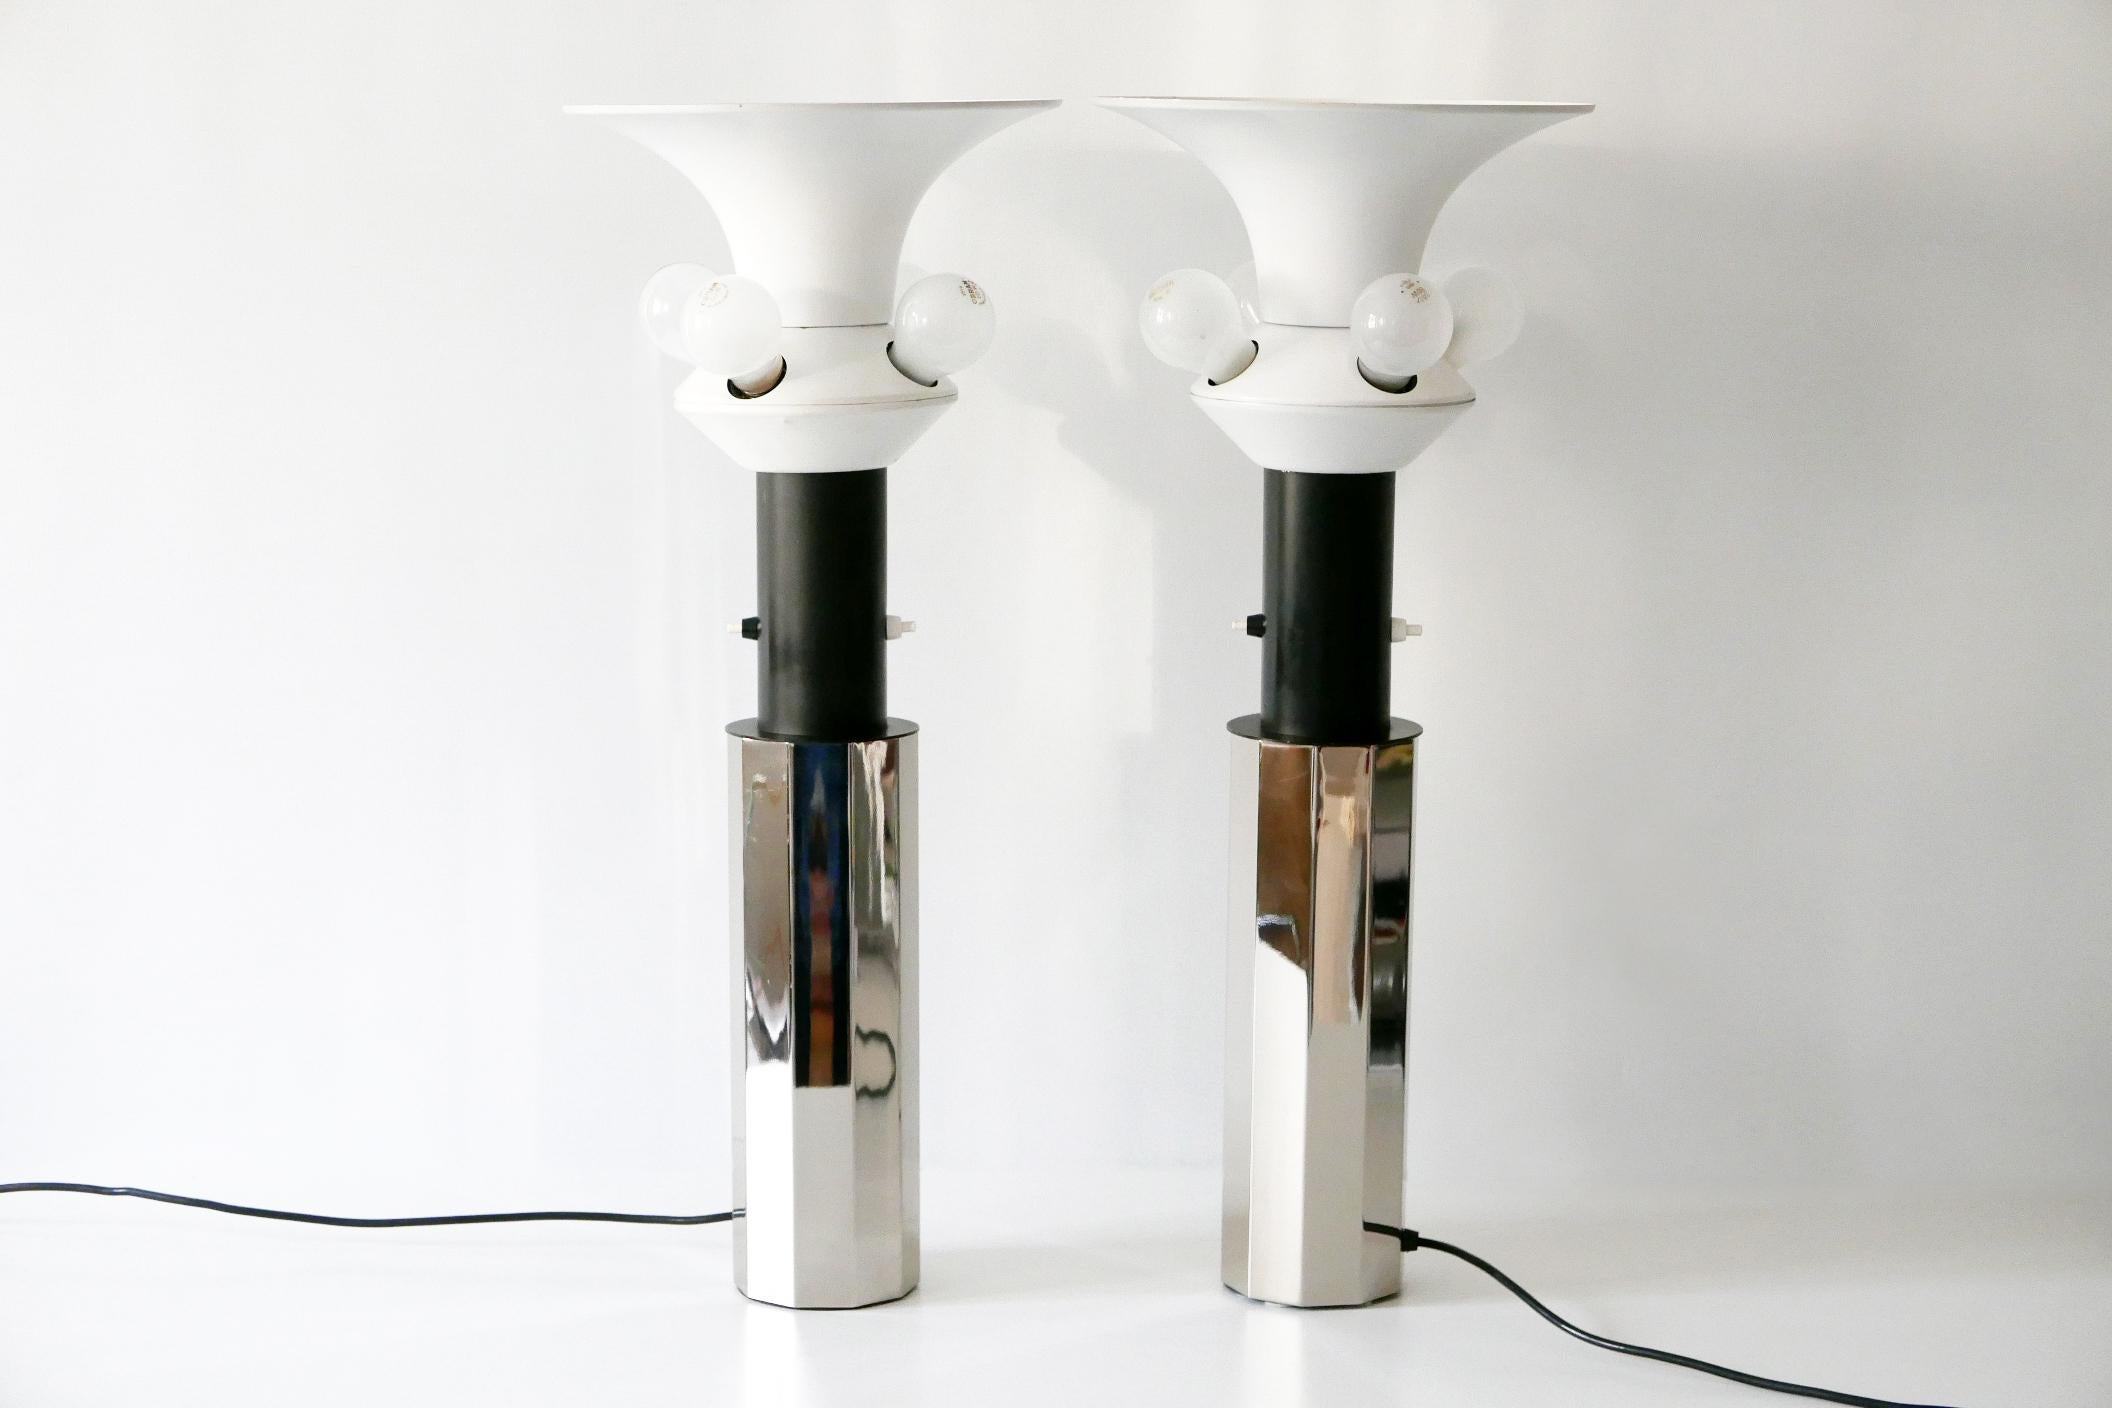 Set of Two Huge, 5-Flamed Midcentury Decagonal Chrome Table Lamps 1960s, Germany For Sale 6